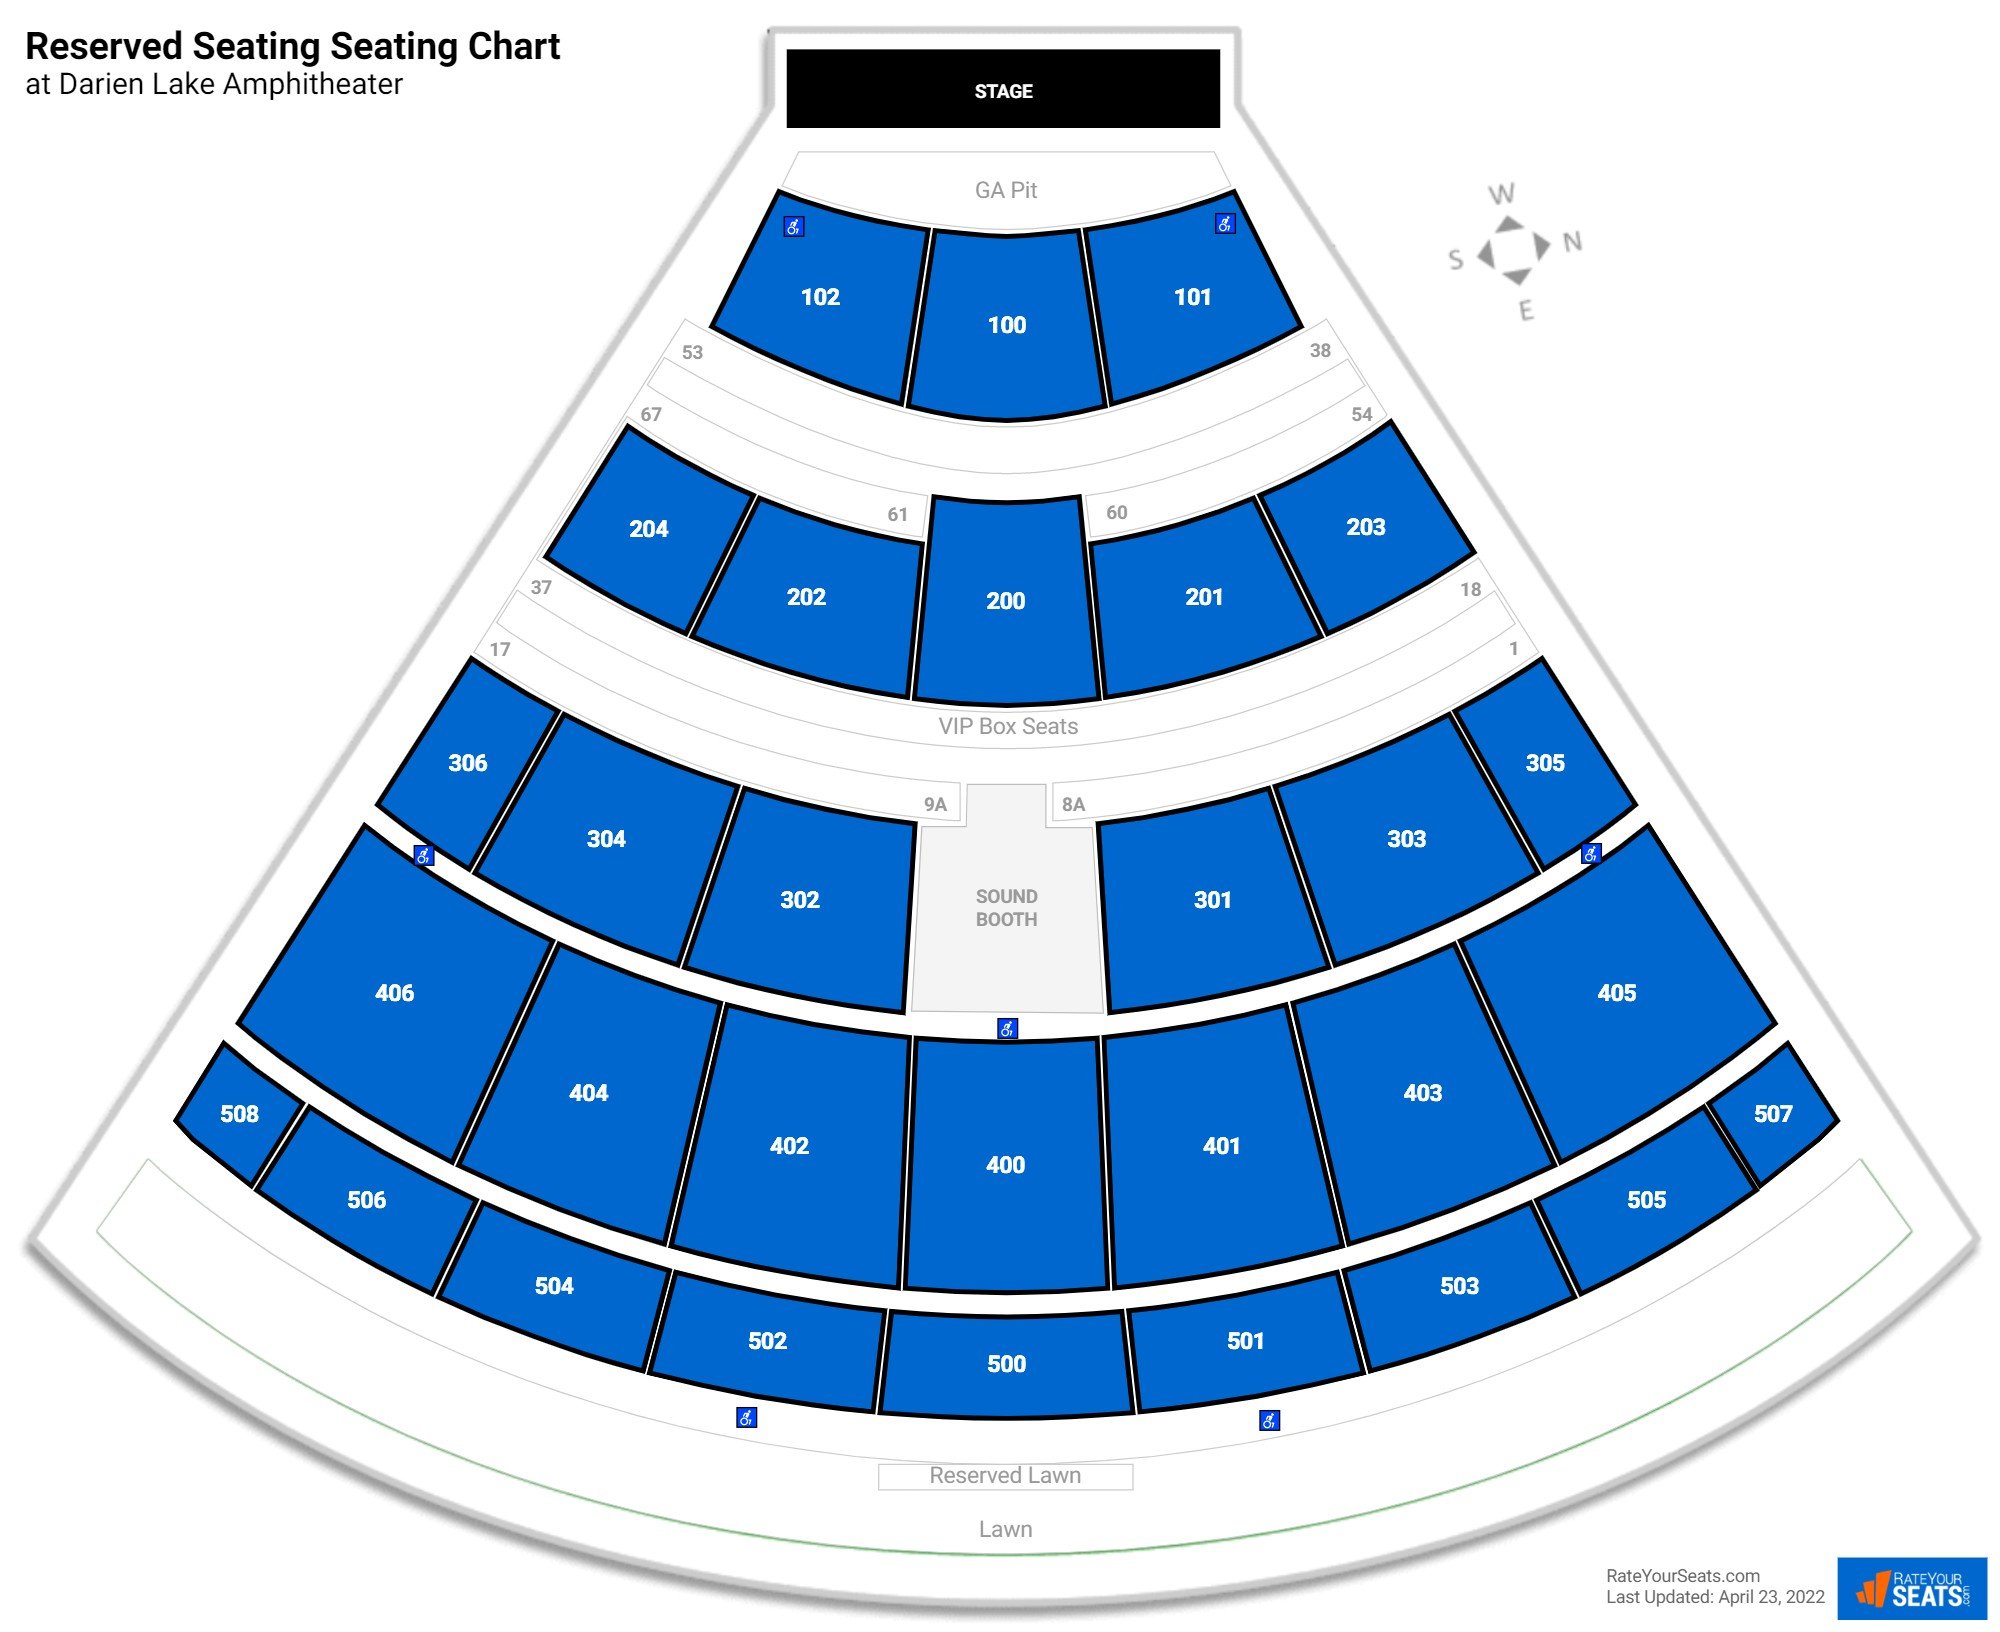 Concert Reserved Seating Seating Chart at Darien Lake Amphitheater